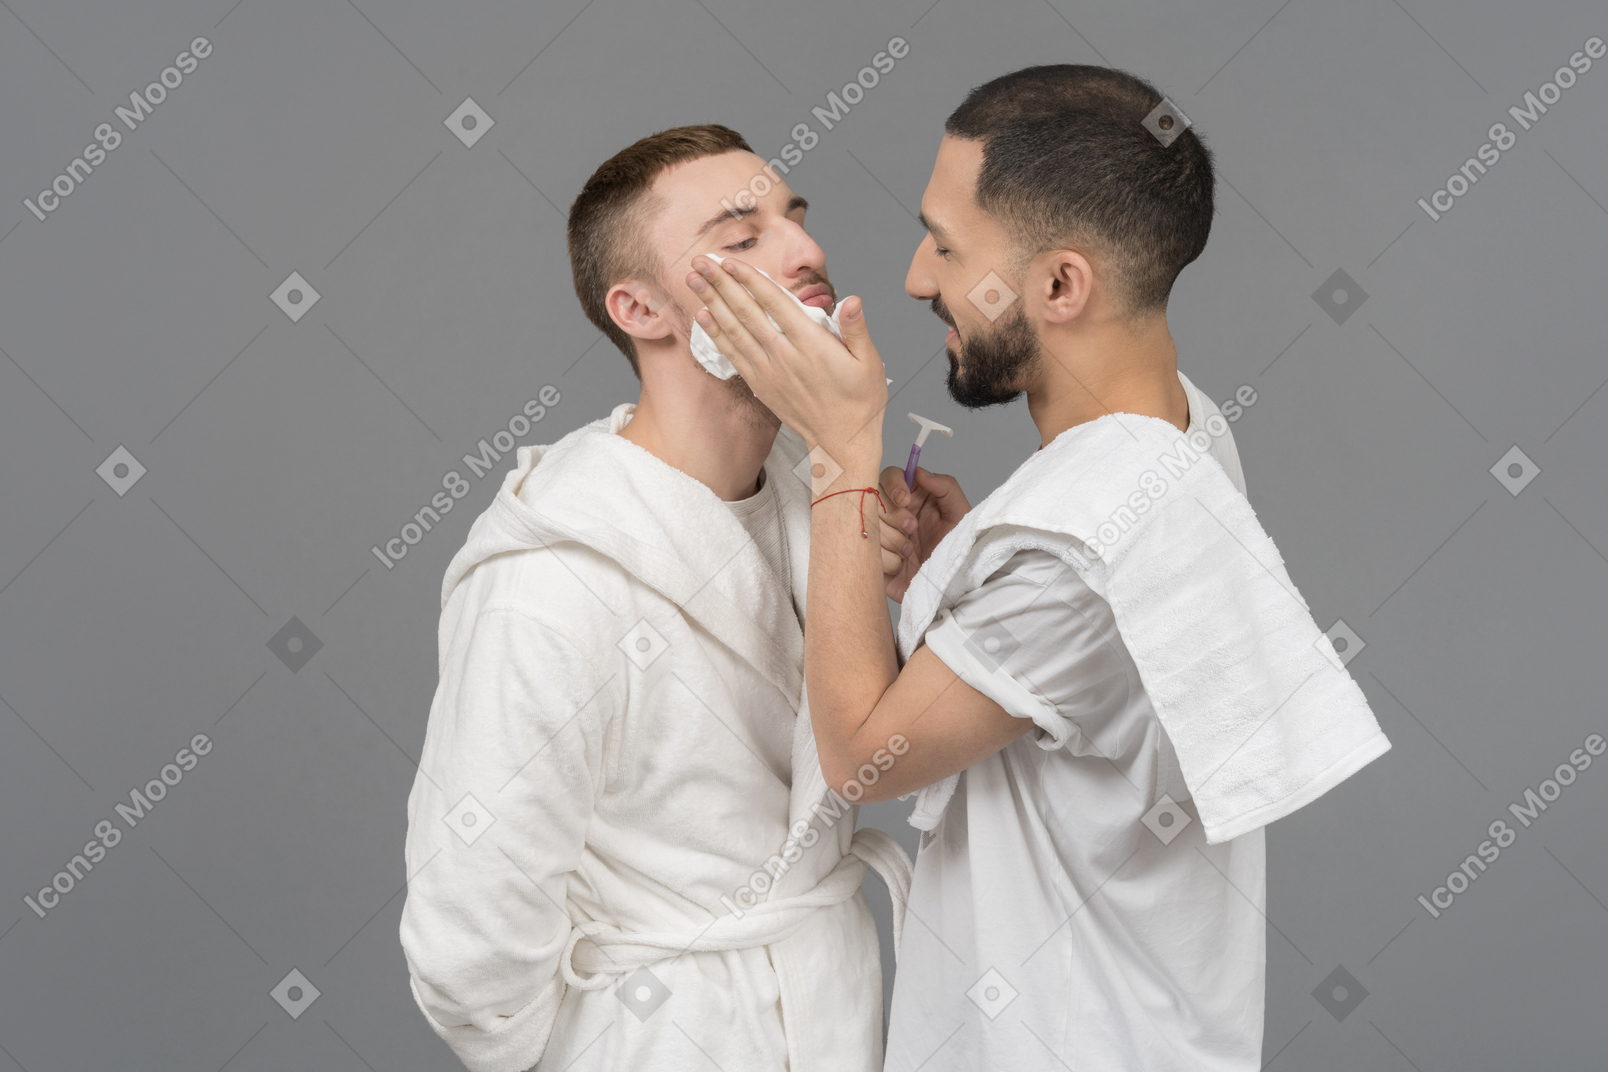 Young caucasian man applying shaving foam on the other's cheek with a smile